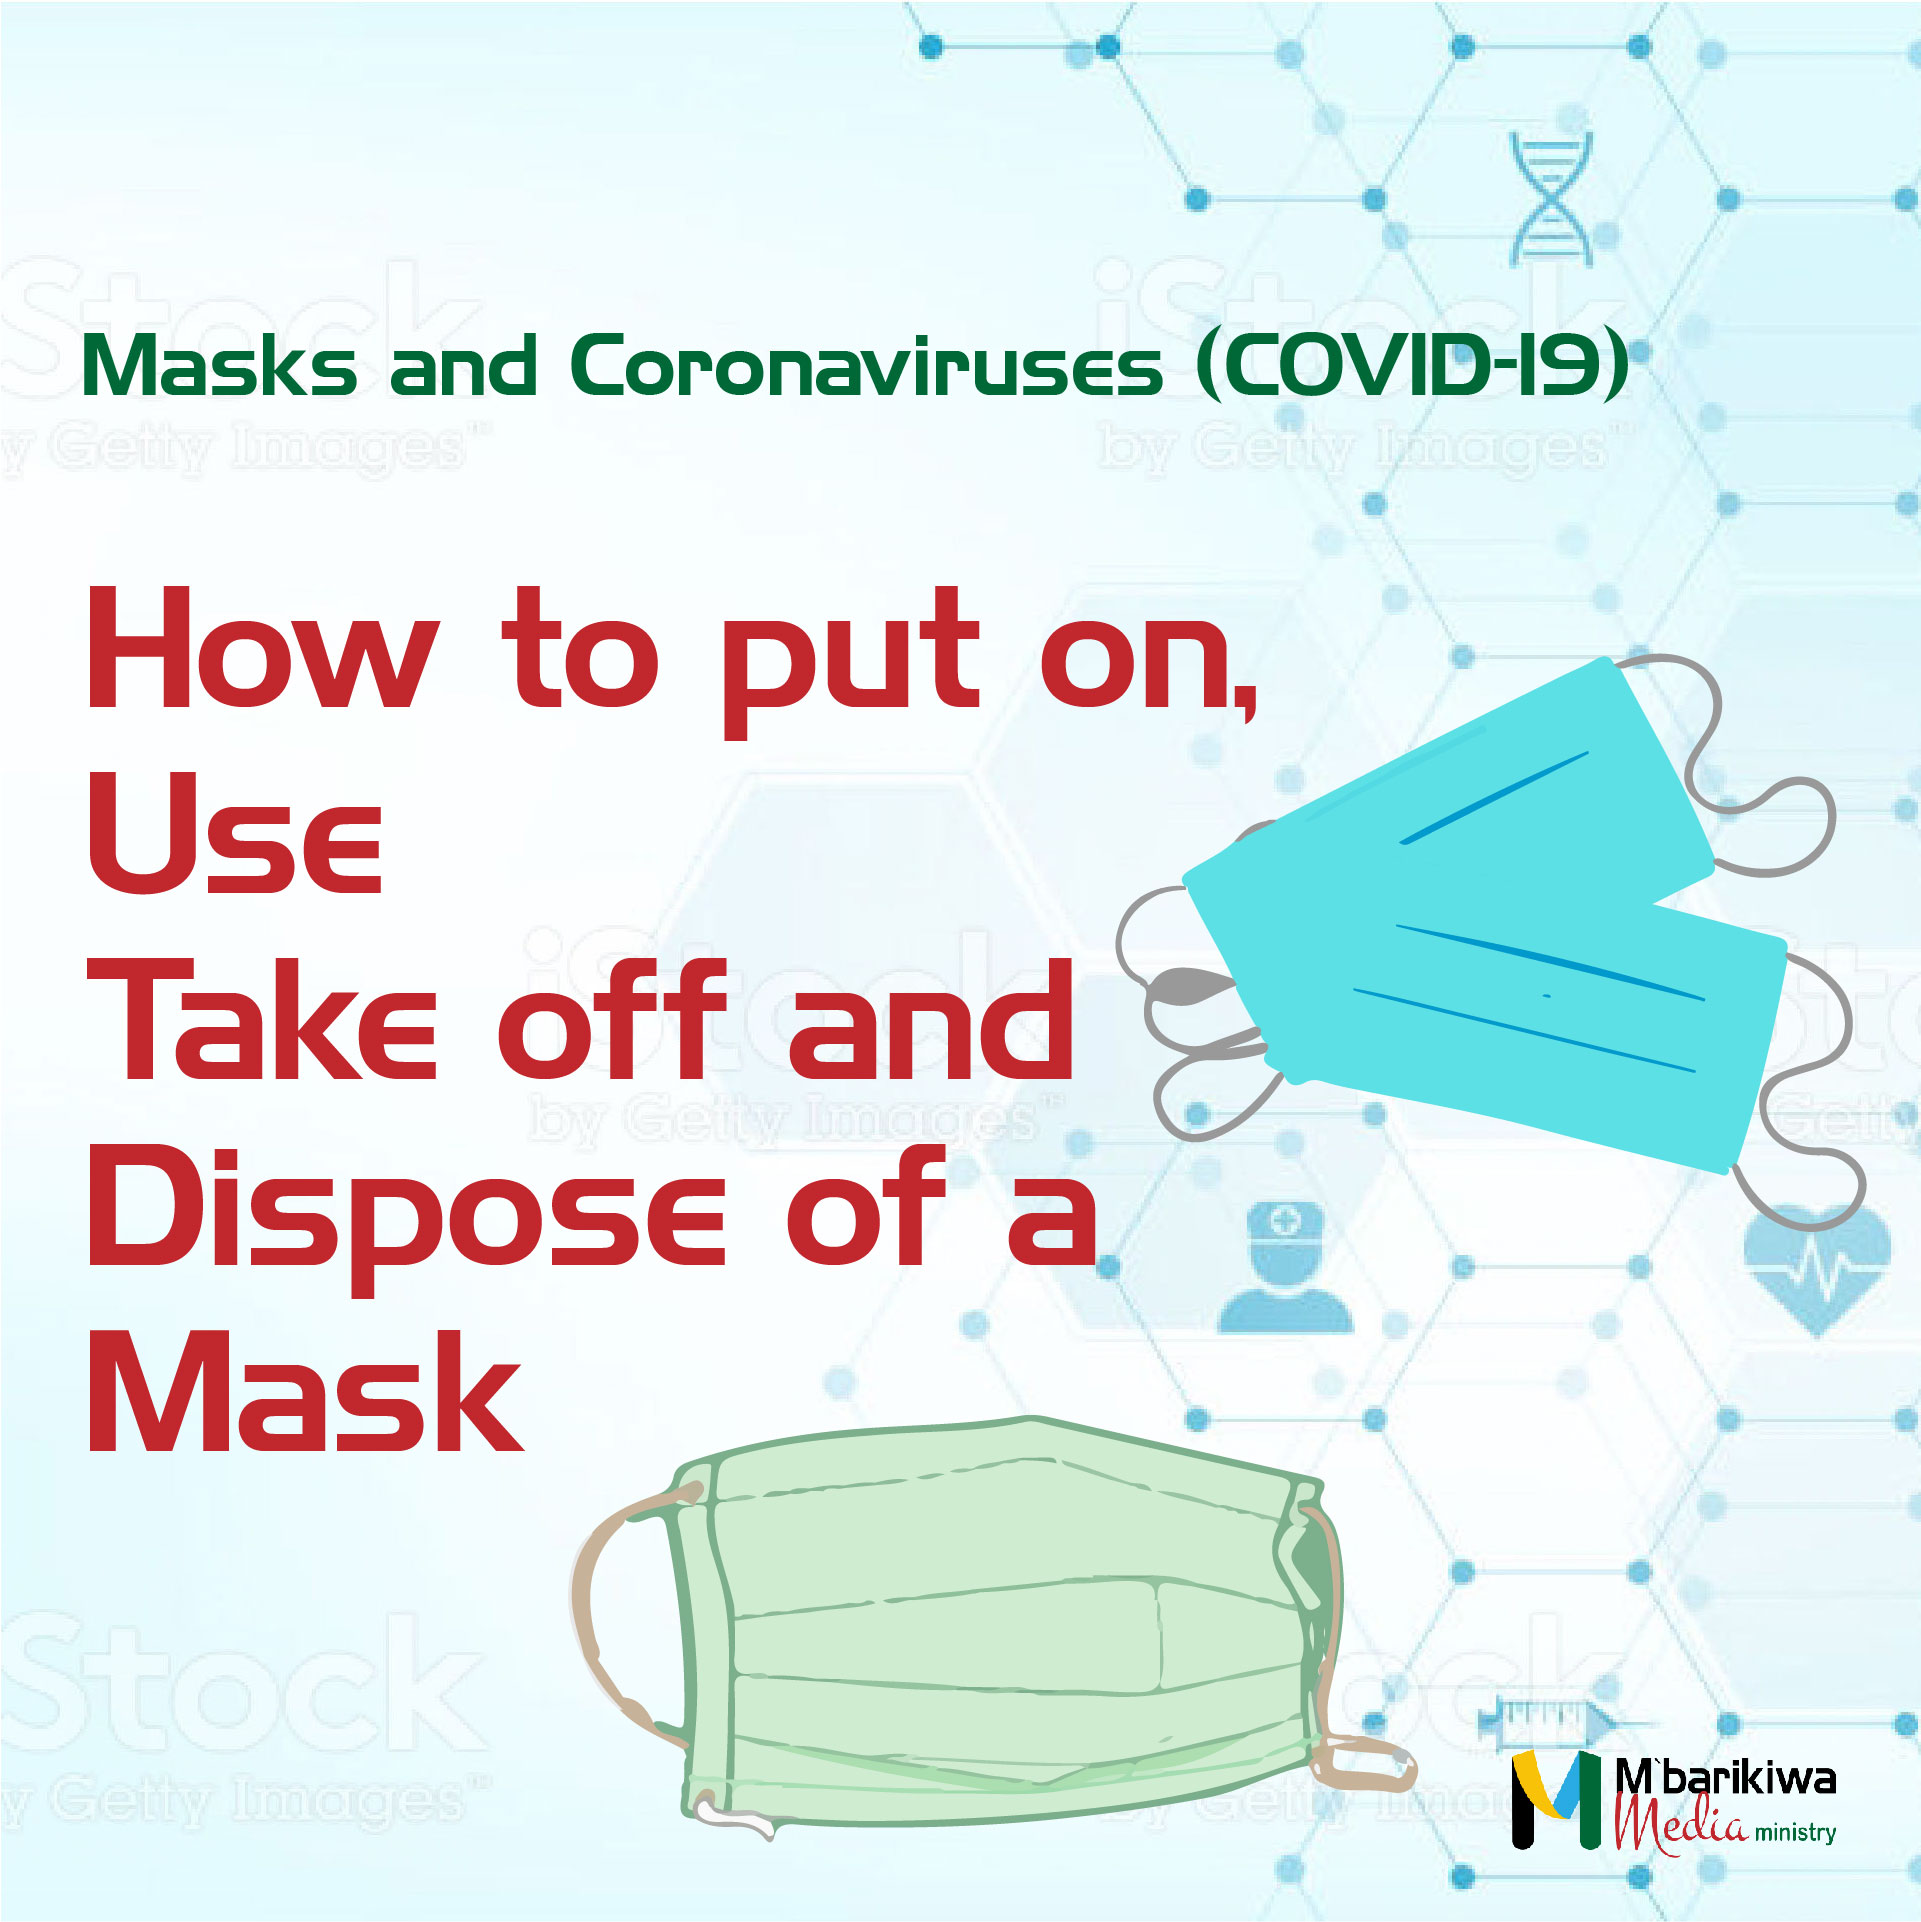 How to put on, use, take off and dispose of a masks